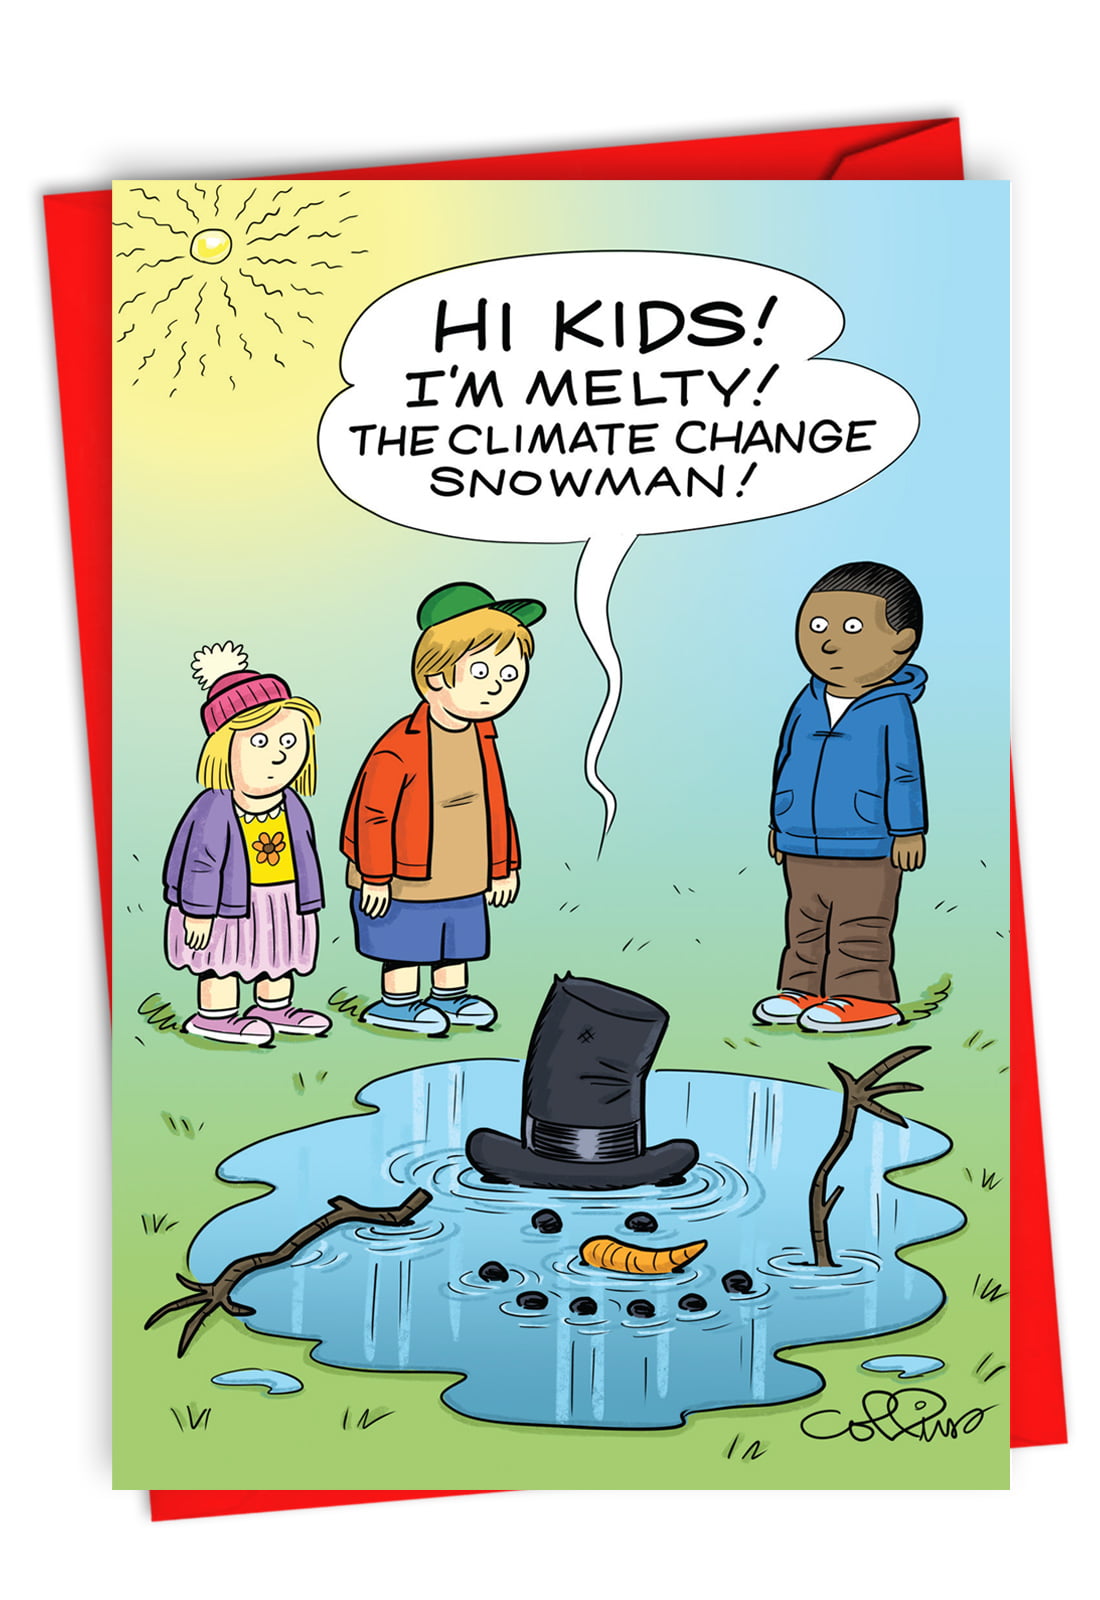 Funny Snowman Christmas Note Card - Global Warming, Climate Change